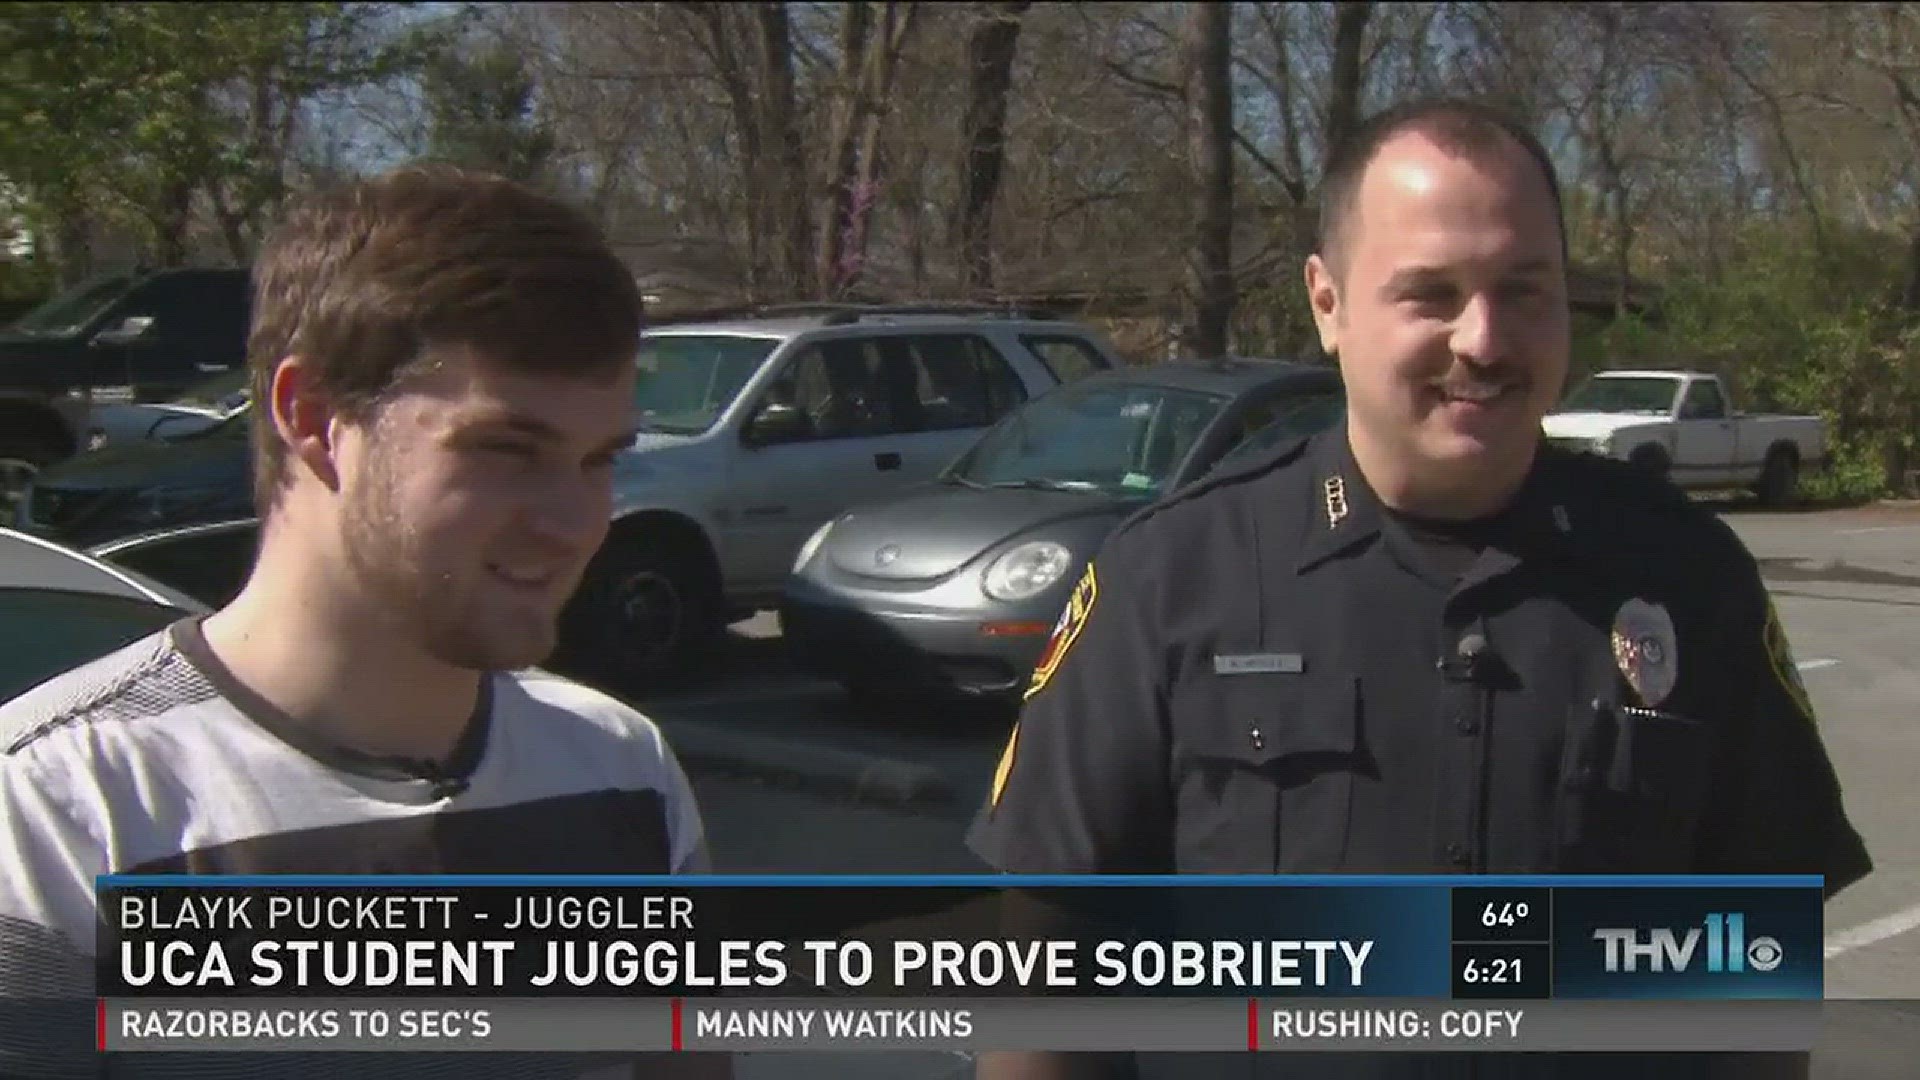 UCA student juggles to prove sobriety